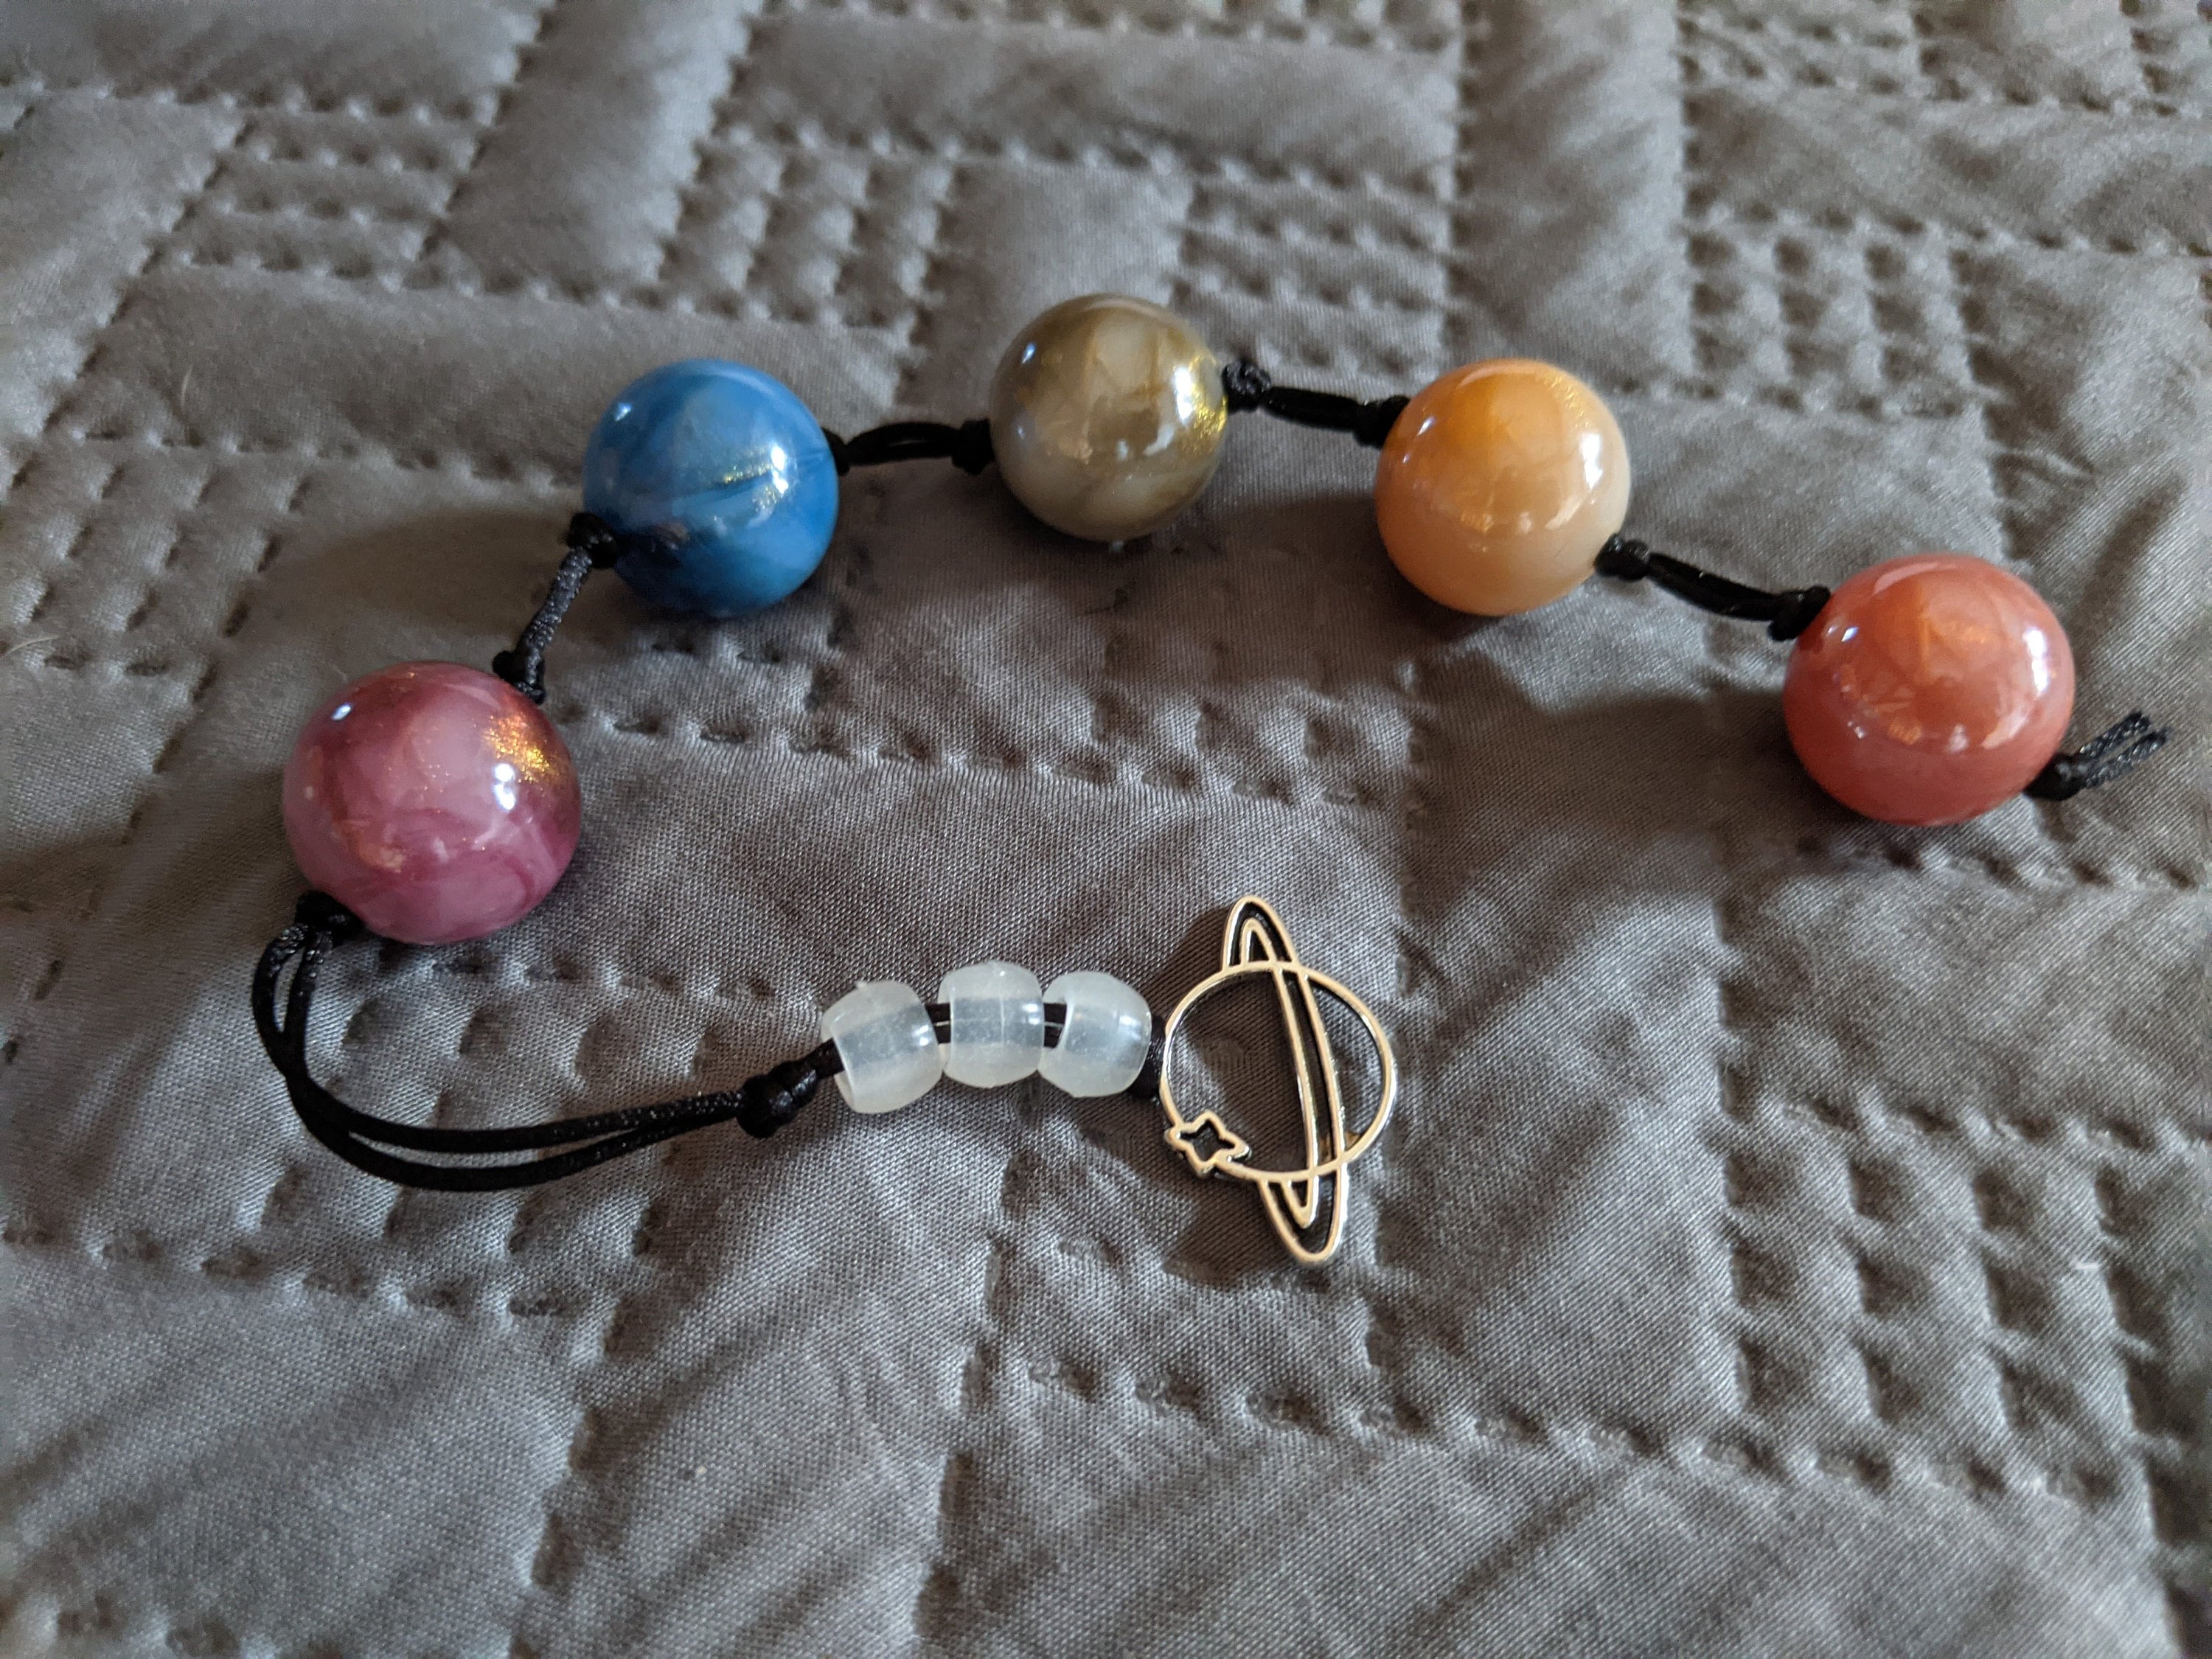 Exoplanet Anal Beads, Cosmic Anal Beads, DDLG Anal Beads, Glow in the Dark Anal  Beads, Butt Plug, Anal Toy, Sex Toy, BDSM Toy, Bondage Toy, - Etsy